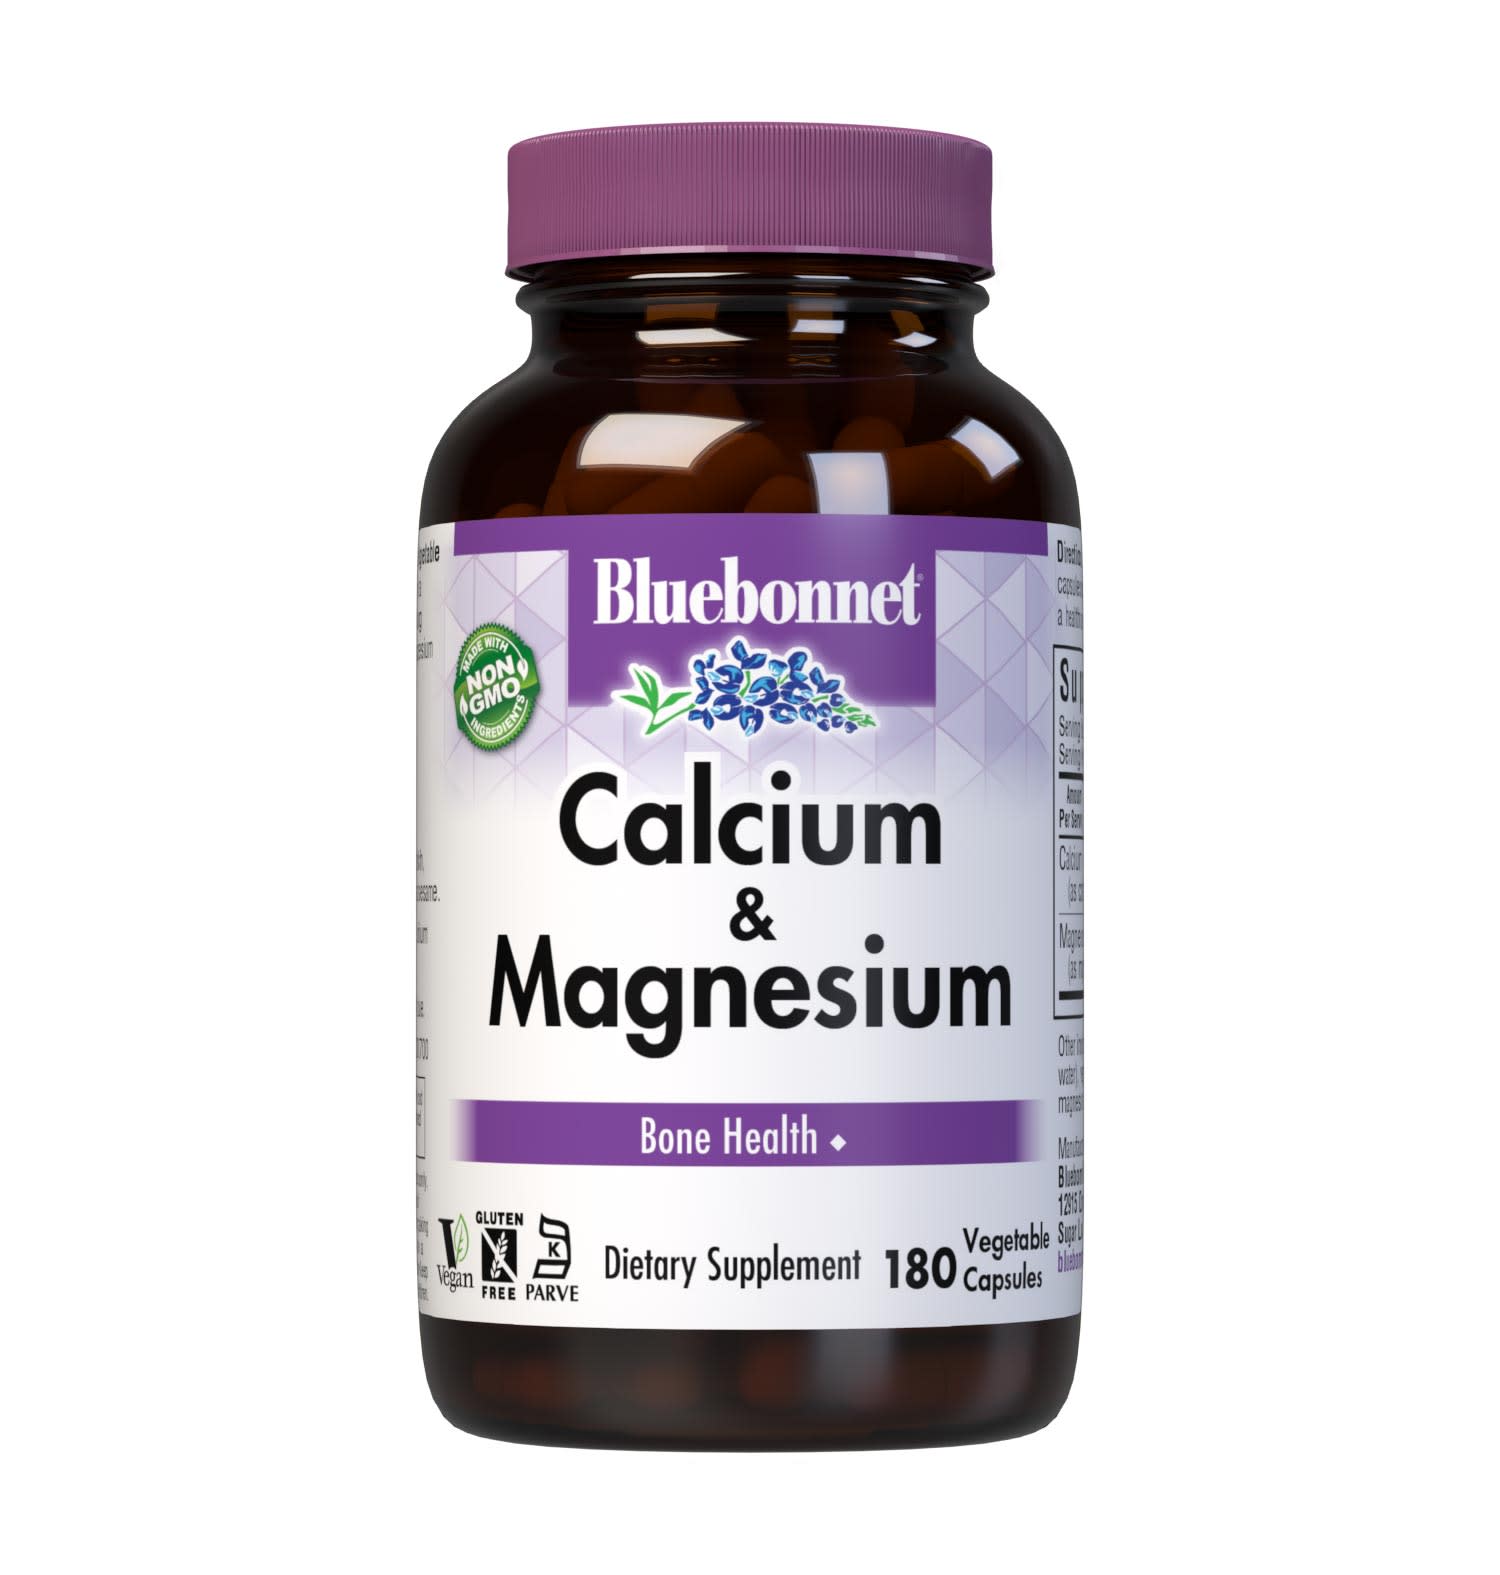 Bluebonnet's Calcium & Magnesium 180 Vegetable Capsules are formulated with calcium in a chelate of calcium citrate and malate, plus magnesium from fully reacted magnesium aspartate for strong, healthy bones. #size_180 count